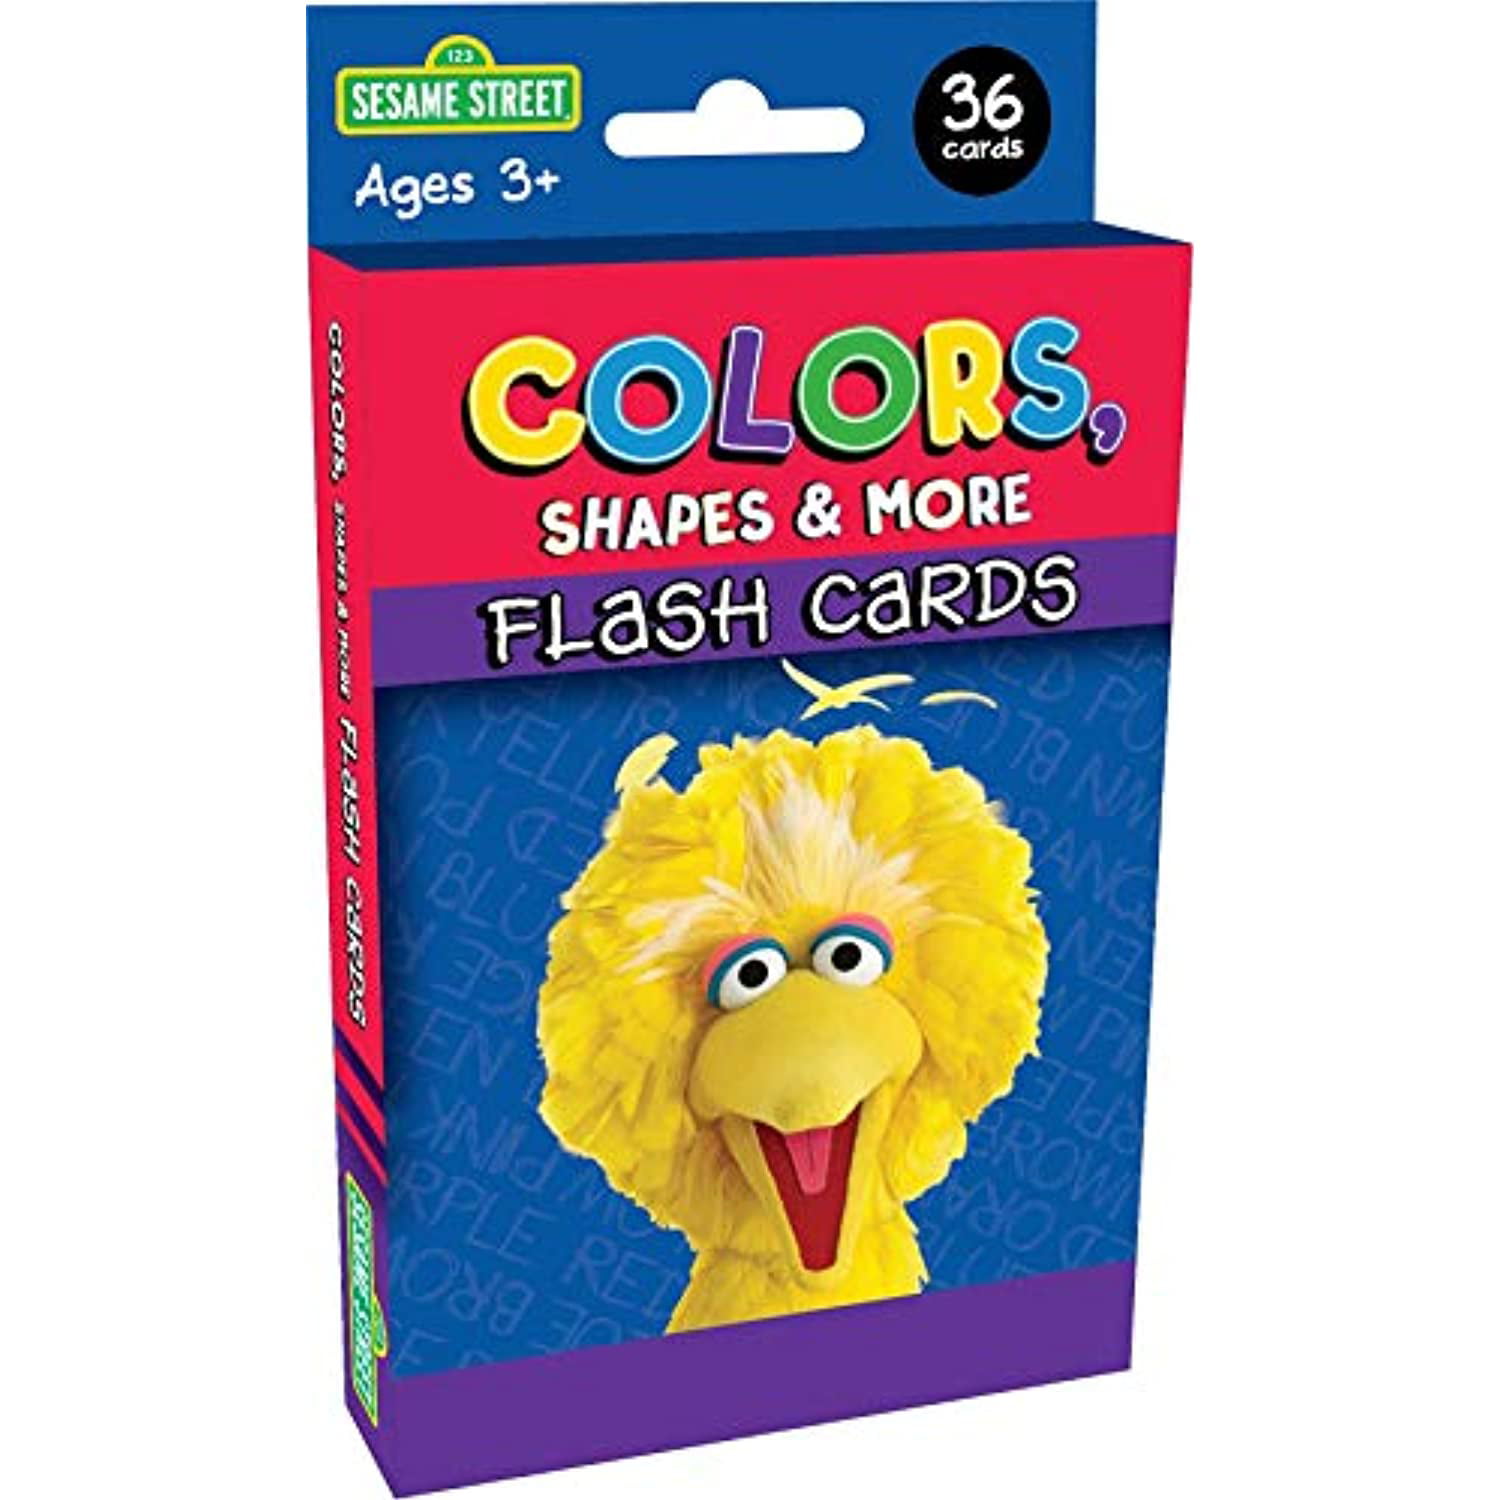 Sesame Street Flash Cards Educational Early Learning Colors Shapes ABCs Numbers 